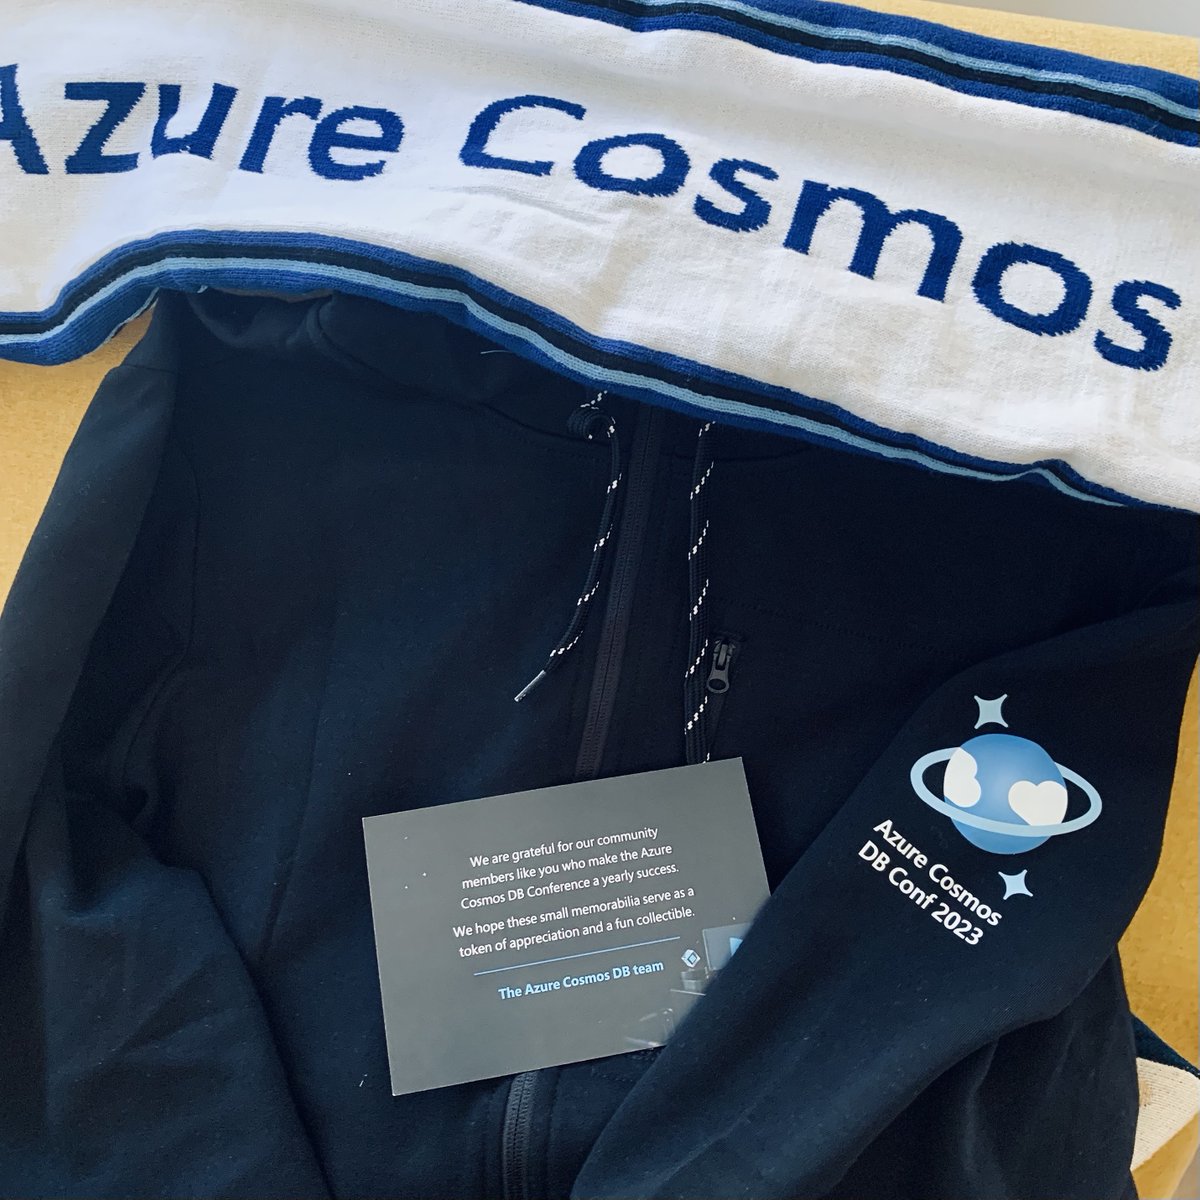 Just received this surprise gift from the #azurecosmosdb team for participating on #azurecosmosdbconf 2023.

Small gestures that mean a lot. Thanks!

#gifts #unexpected #microsoft #publicspeaking